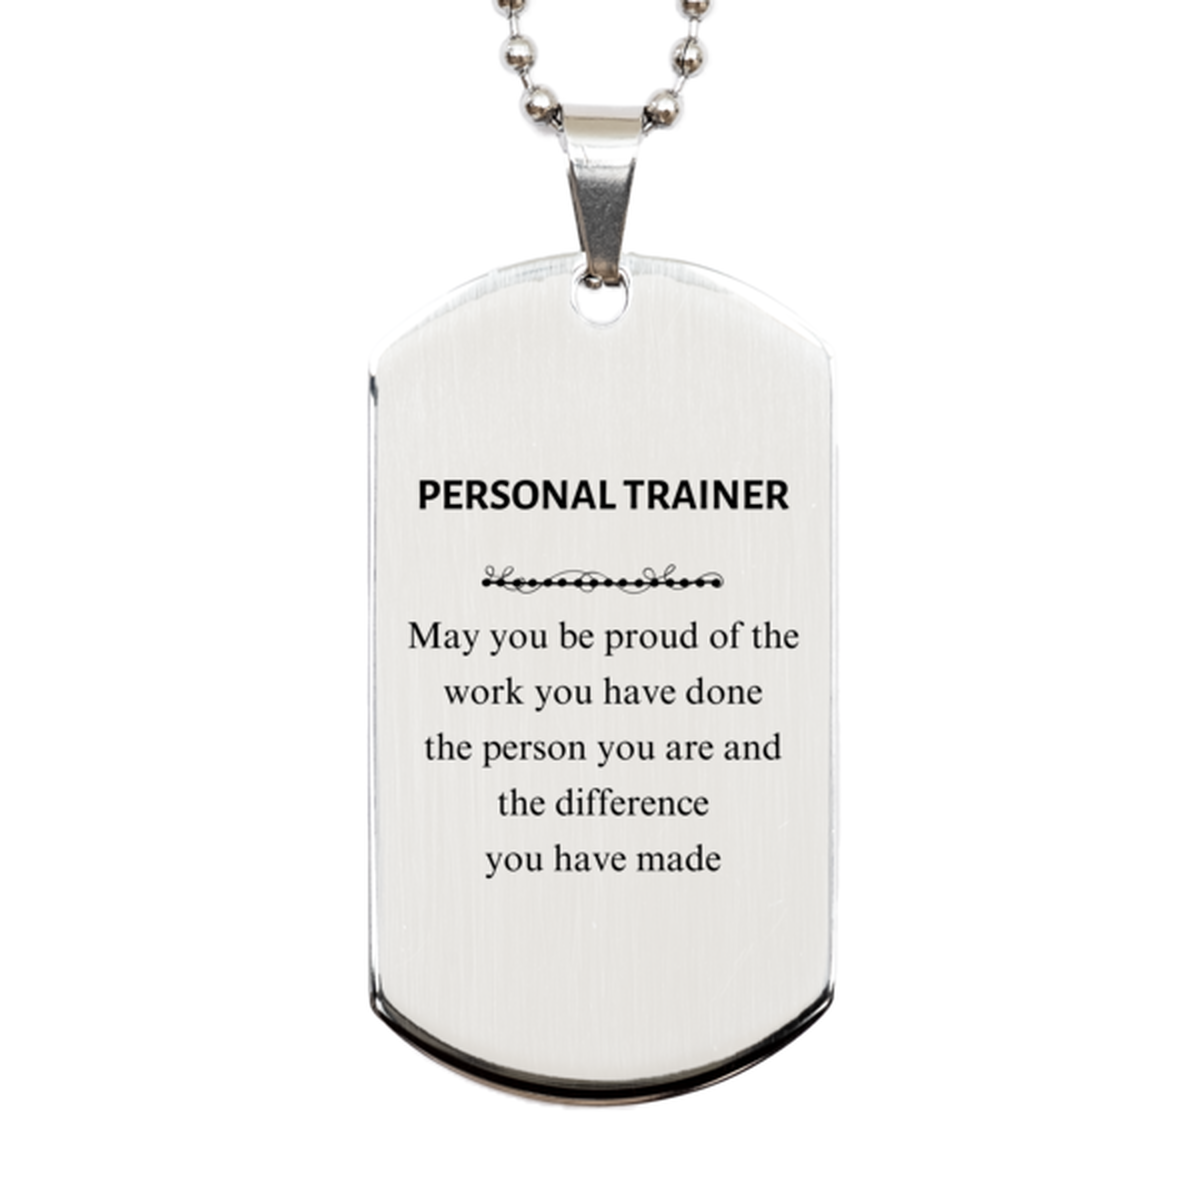 Personal Trainer May you be proud of the work you have done, Retirement Personal Trainer Silver Dog Tag for Colleague Appreciation Gifts Amazing for Personal Trainer